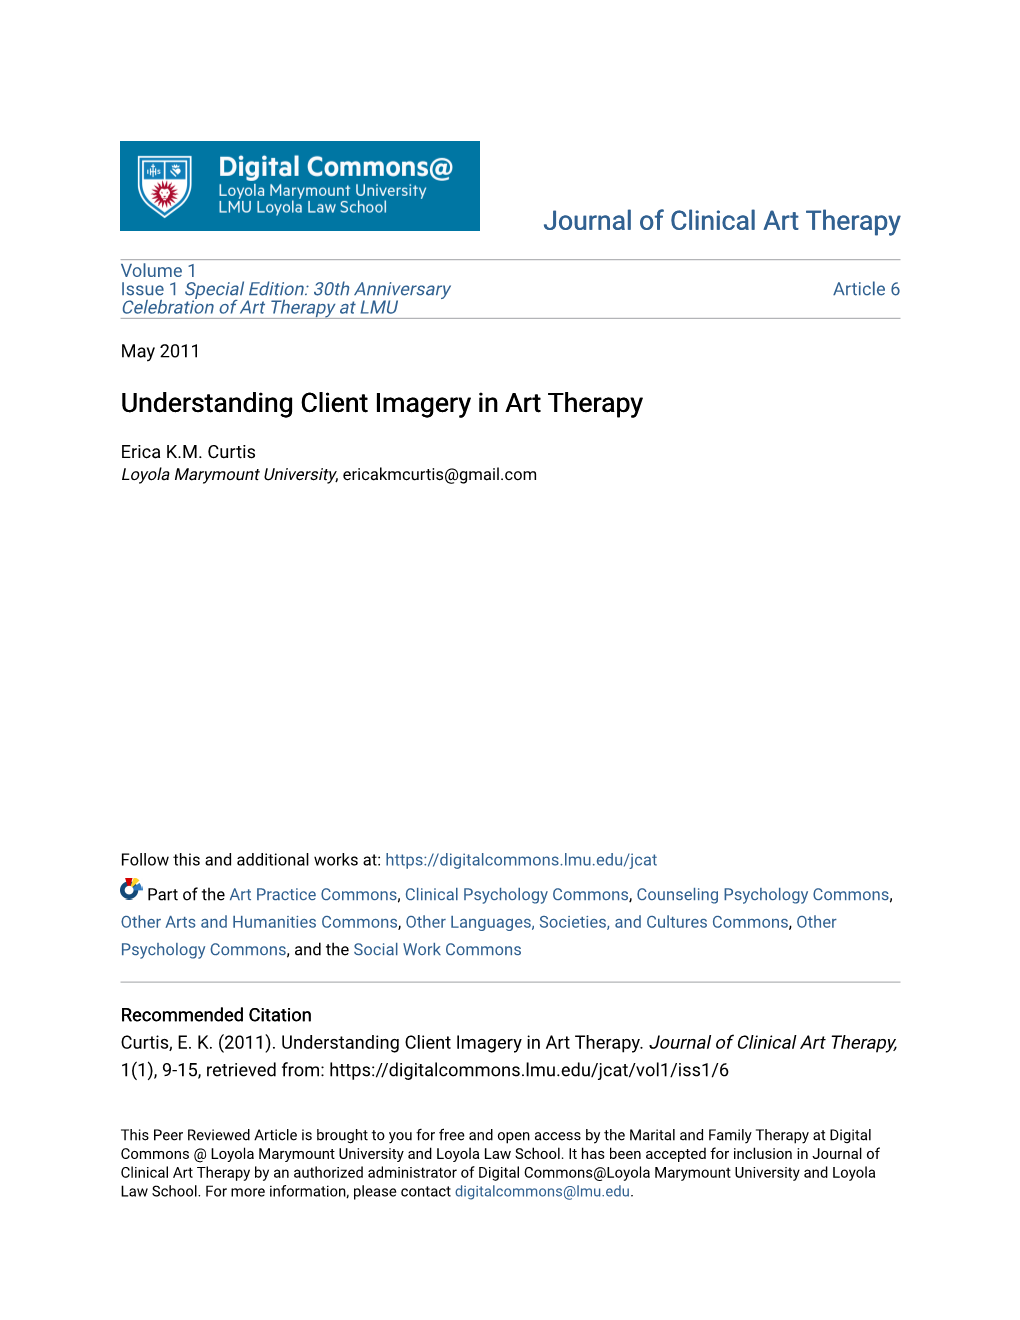 Understanding Client Imagery in Art Therapy